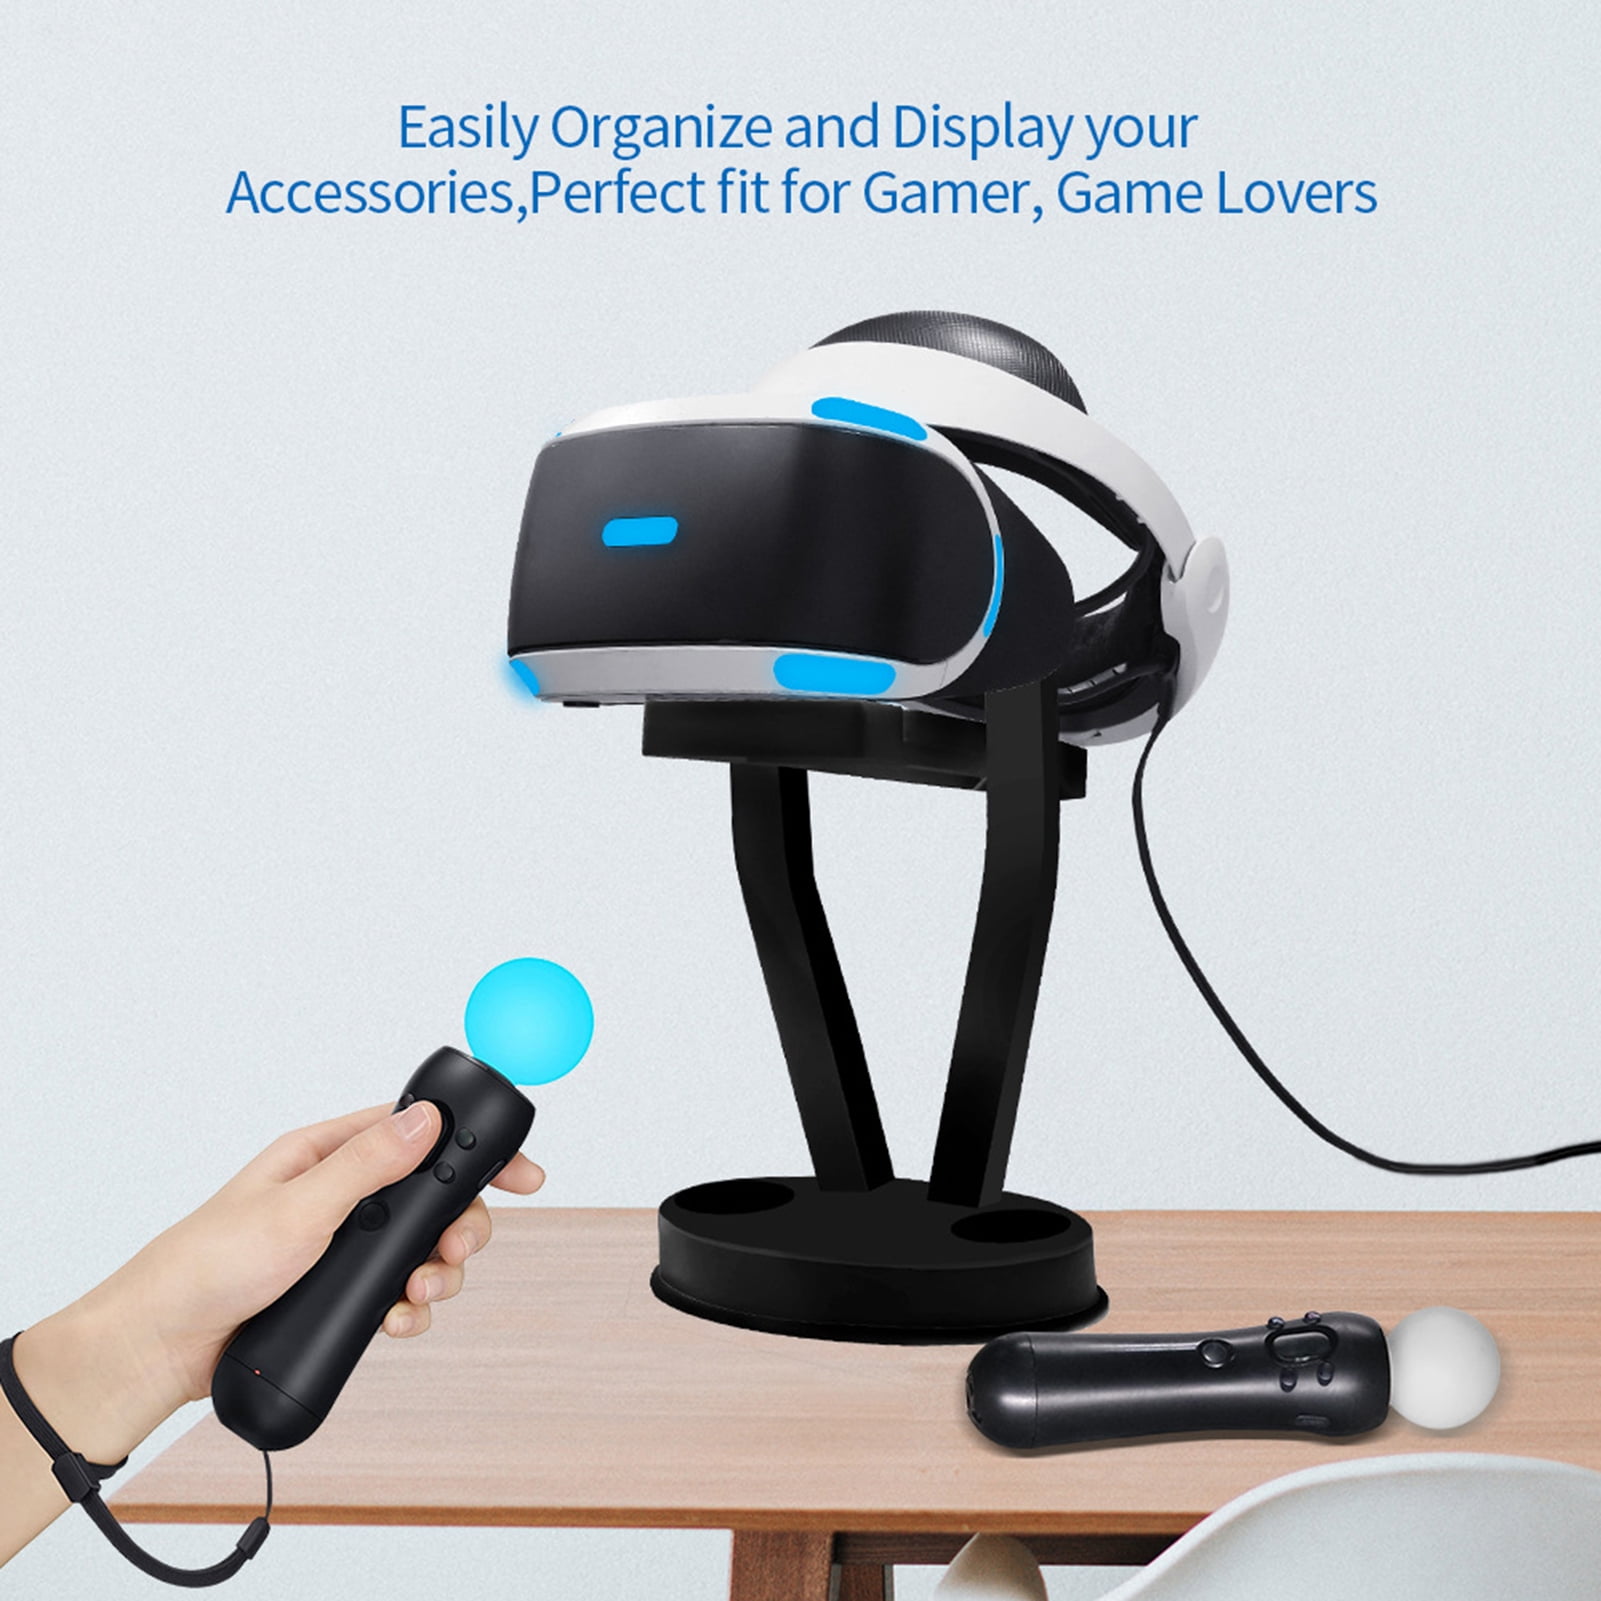 Naierhg VR Stand Professional Stable PC Desk Management Virtual Reality Headset Display Holder for Oculus Quest2/PS VR - Walmart.com